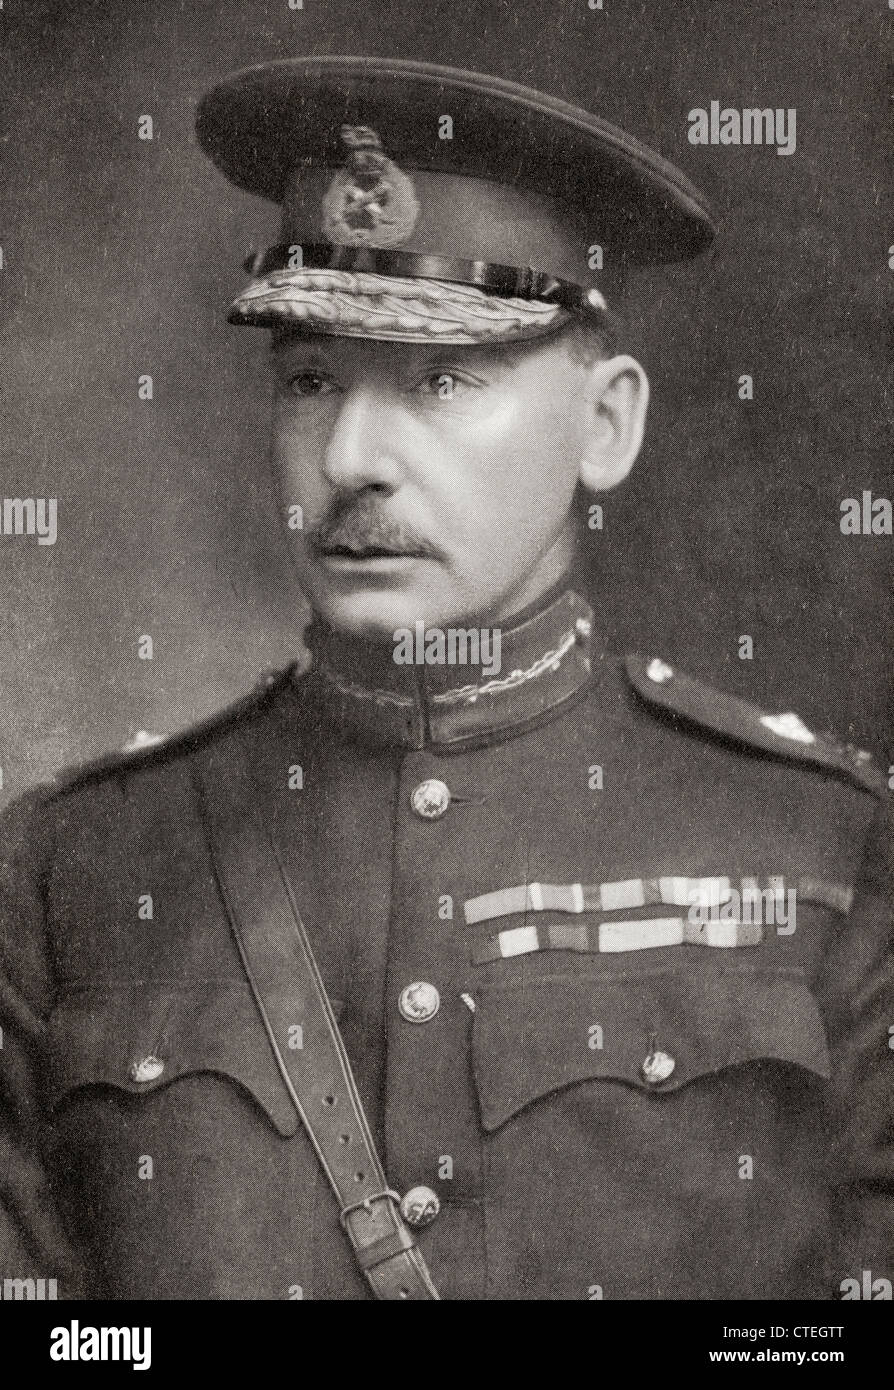 Major General Sir Charles Vere Ferrers Townshend, 1861 –1924. British Indian Army officer. From The Year 1916 Illustrated. Stock Photo